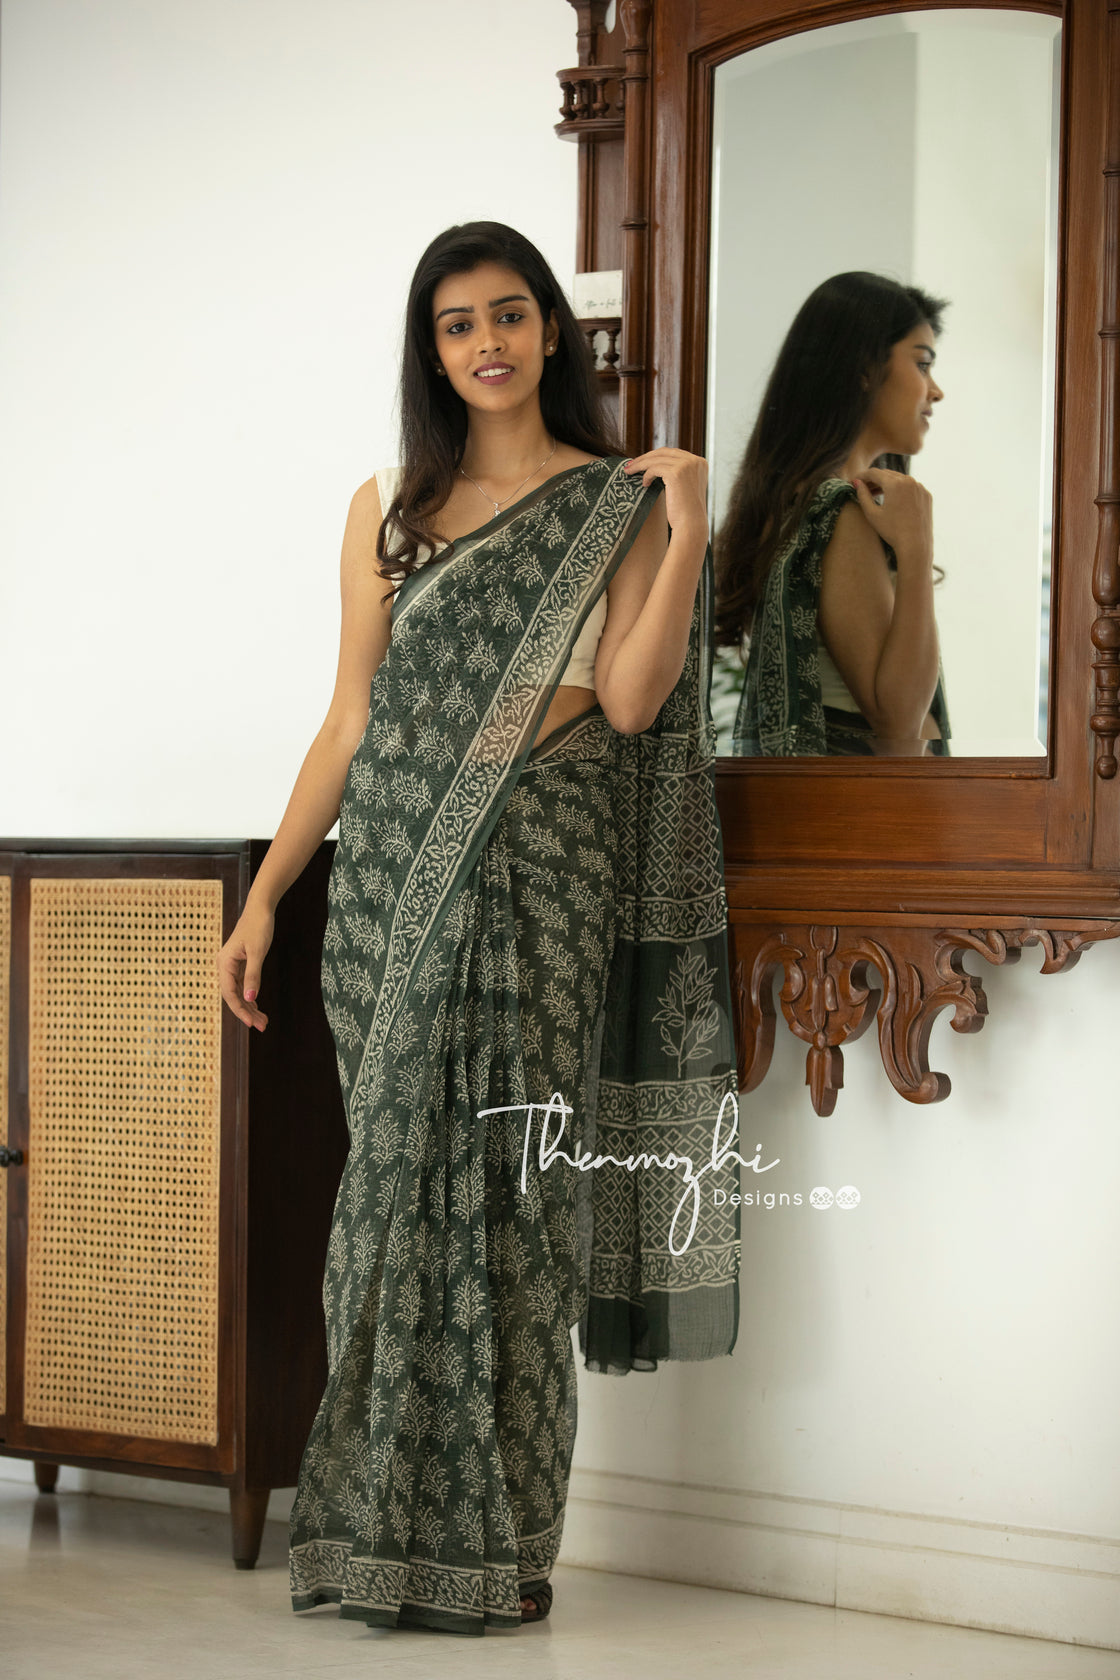 Thenmozhi Designs on Instagram: “Available Now - Love story! Shop @  www.thenmozhidesigns.com Please DM for more details Model @induja_… |  Model, Fashion, Dress